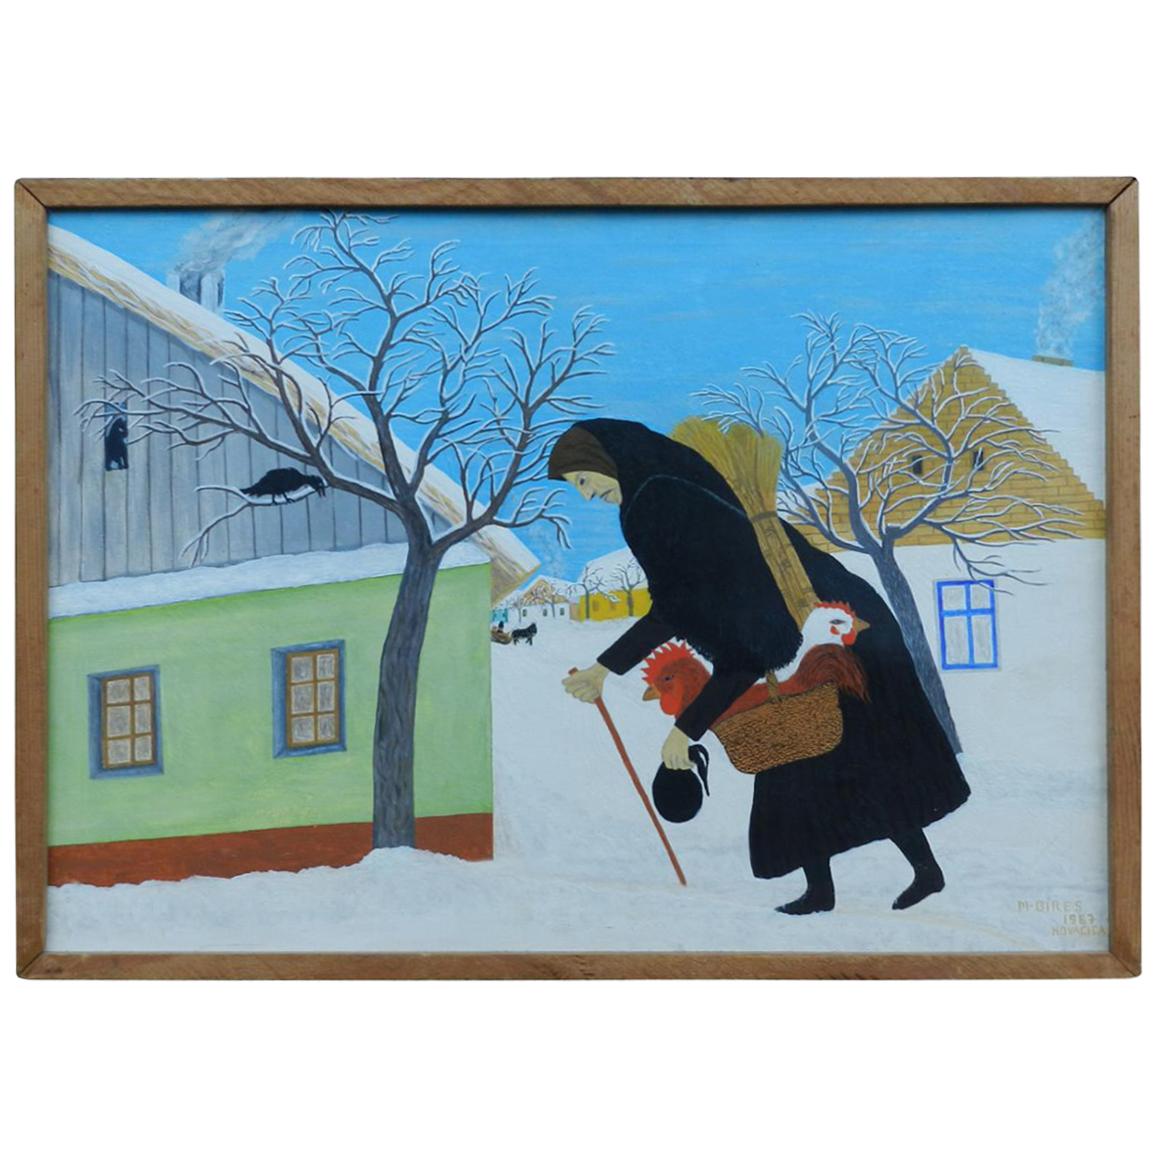 M. Bires, Painting Hst "Landscape Naif" Slovak School, Located in Kovacica, 1967 For Sale